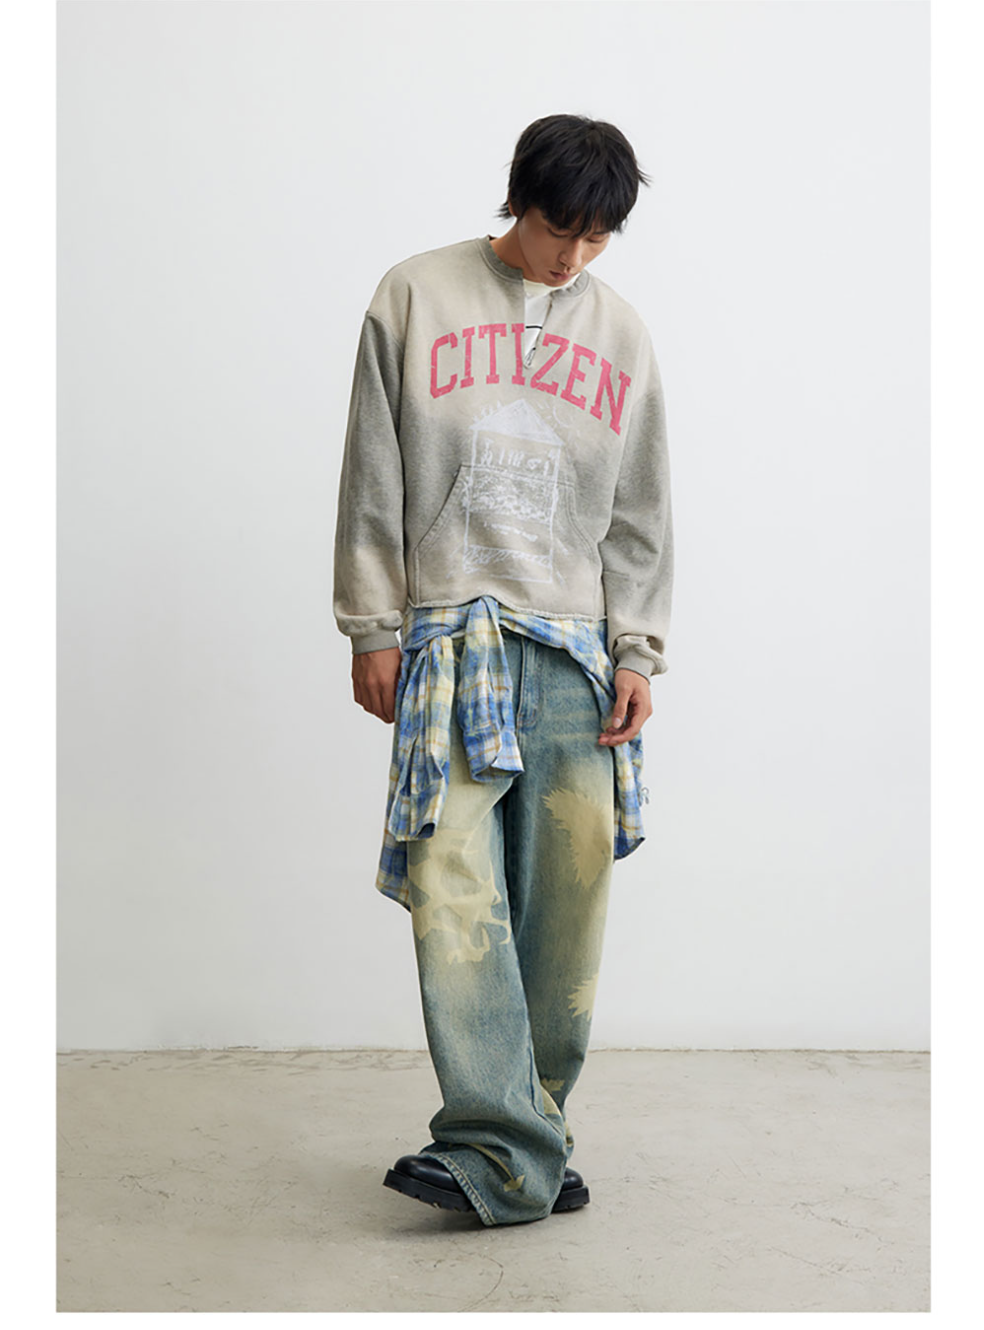 [CONP] House of Citizen Sweater